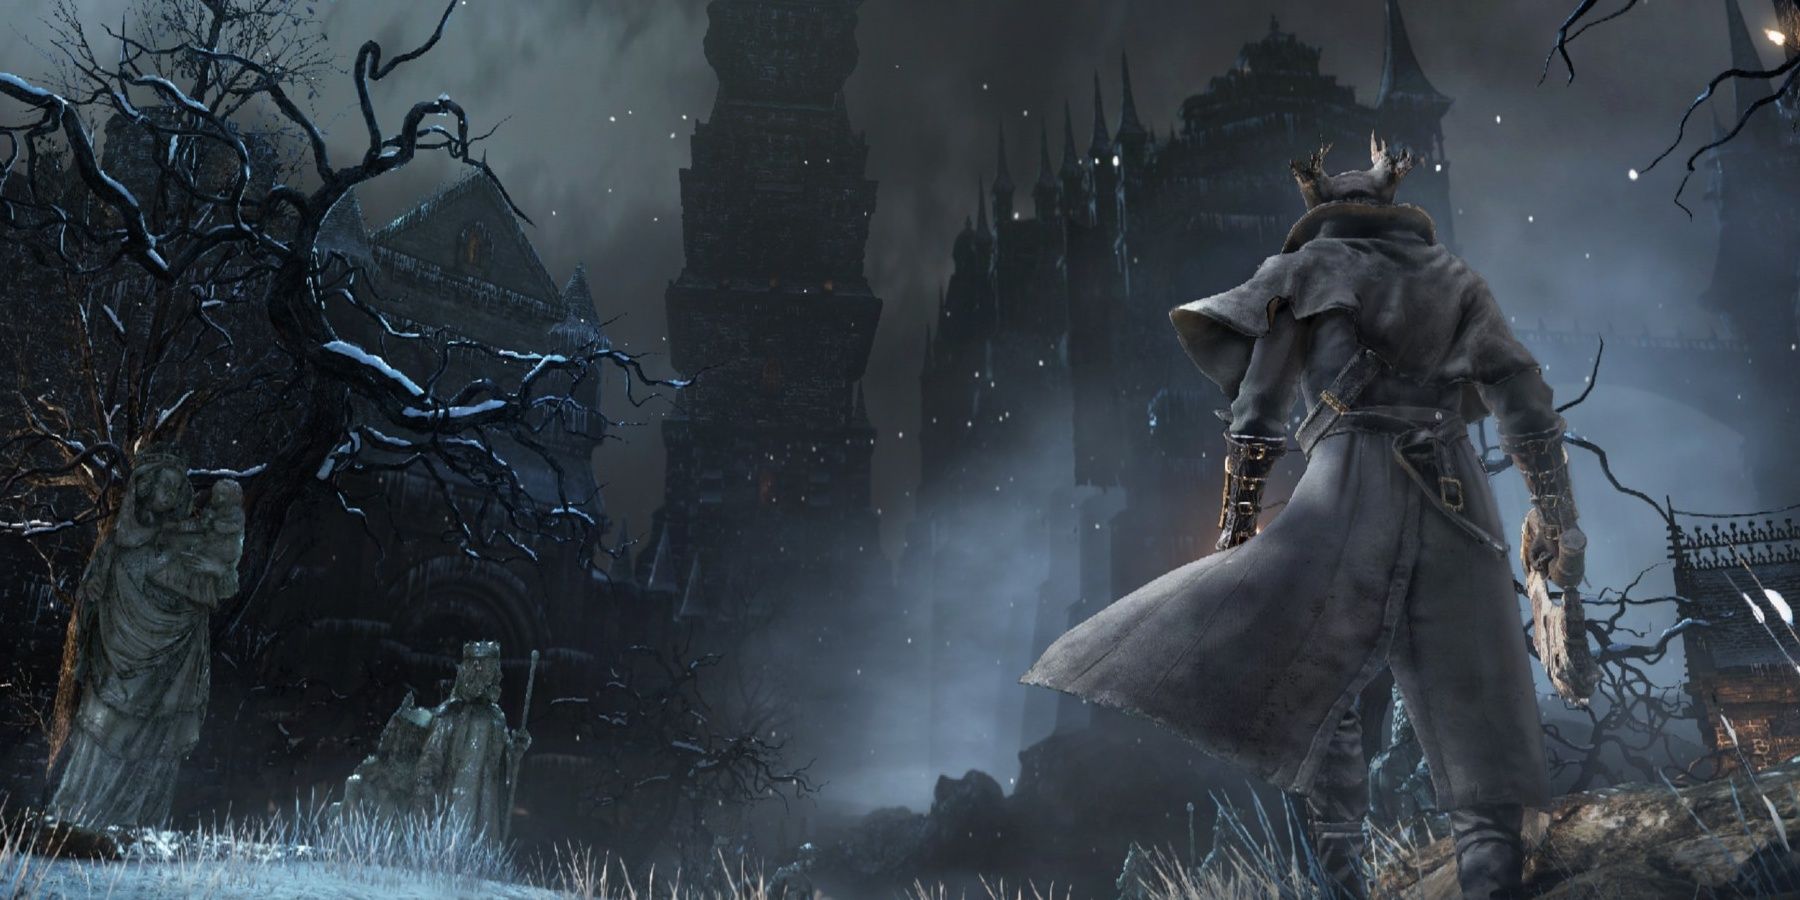 Official Bloodborne Promotional Art